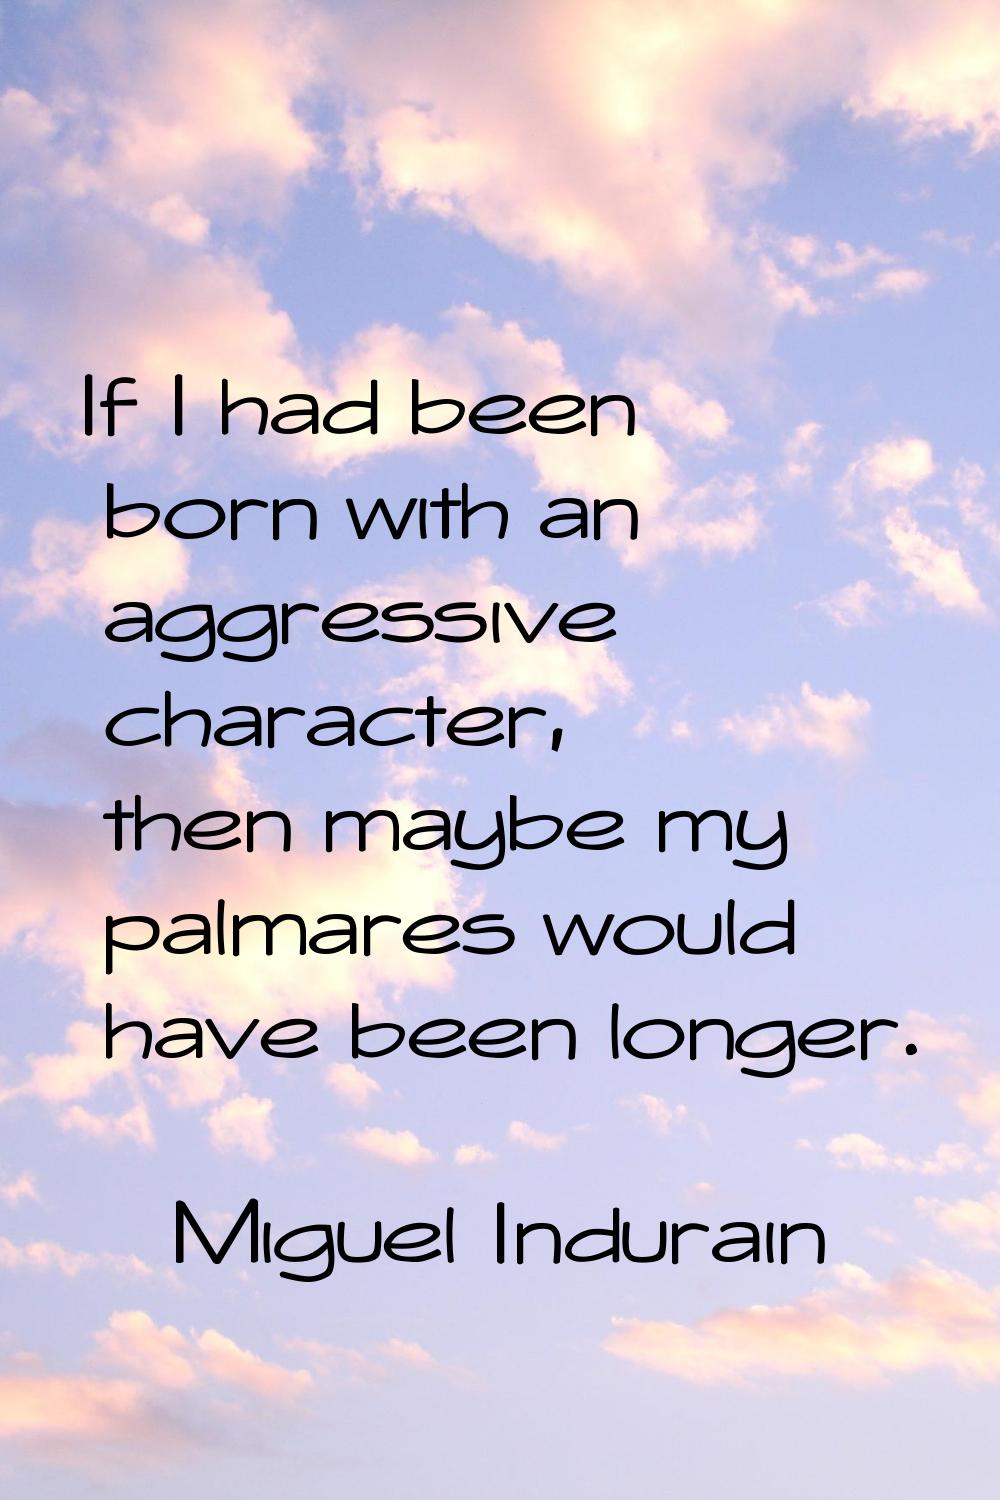 If I had been born with an aggressive character, then maybe my palmares would have been longer.